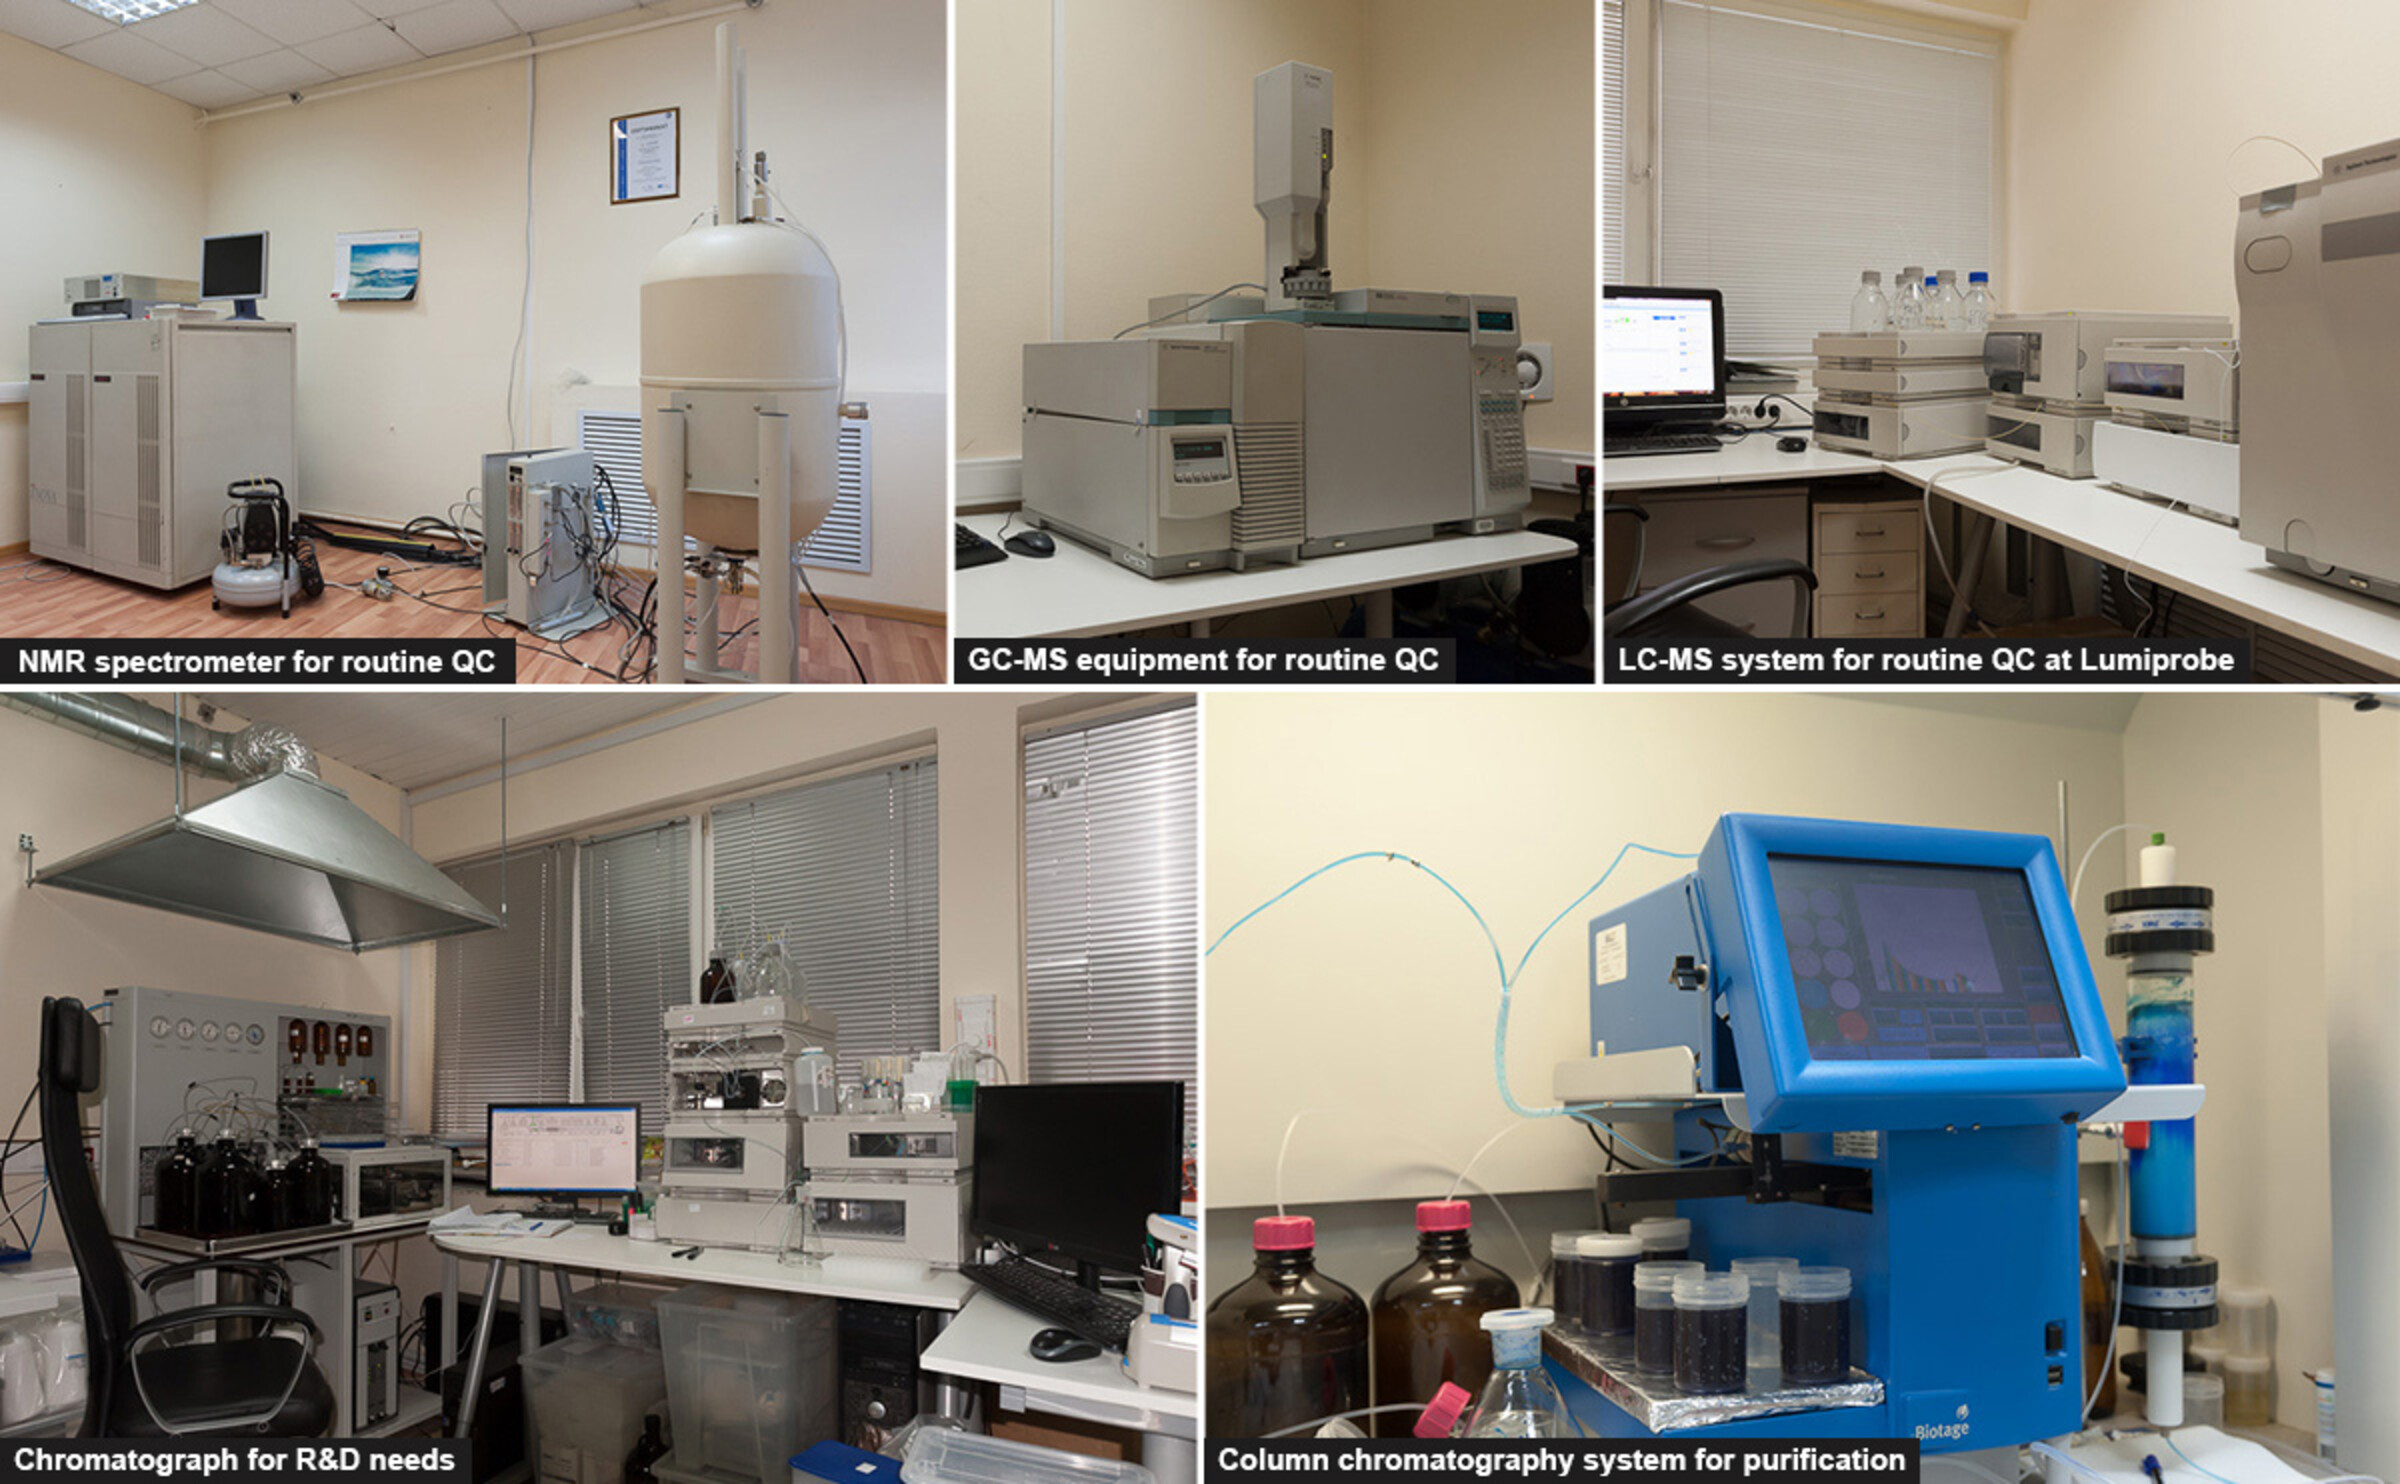 NMR spectrometer for routine QC, GC-MS equipment for routine QC, LC-MS system for routine QC at Lumiprobe, Chromatograph for R&D needs, Column chromatography system for purification